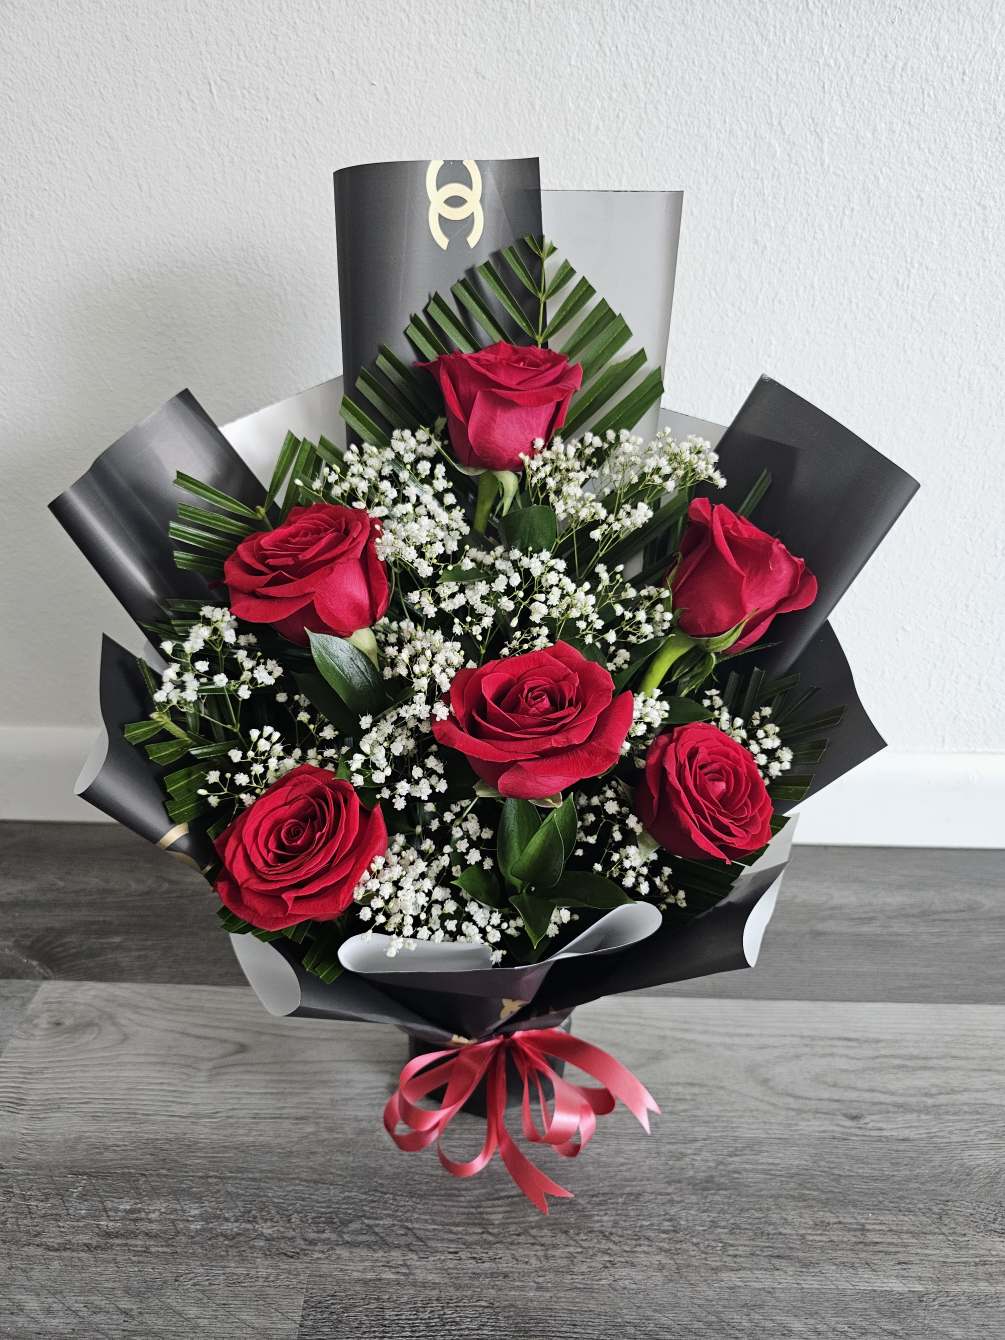 Our half dozen vaseless luxury wrapped rose bouquet are kept fresh with